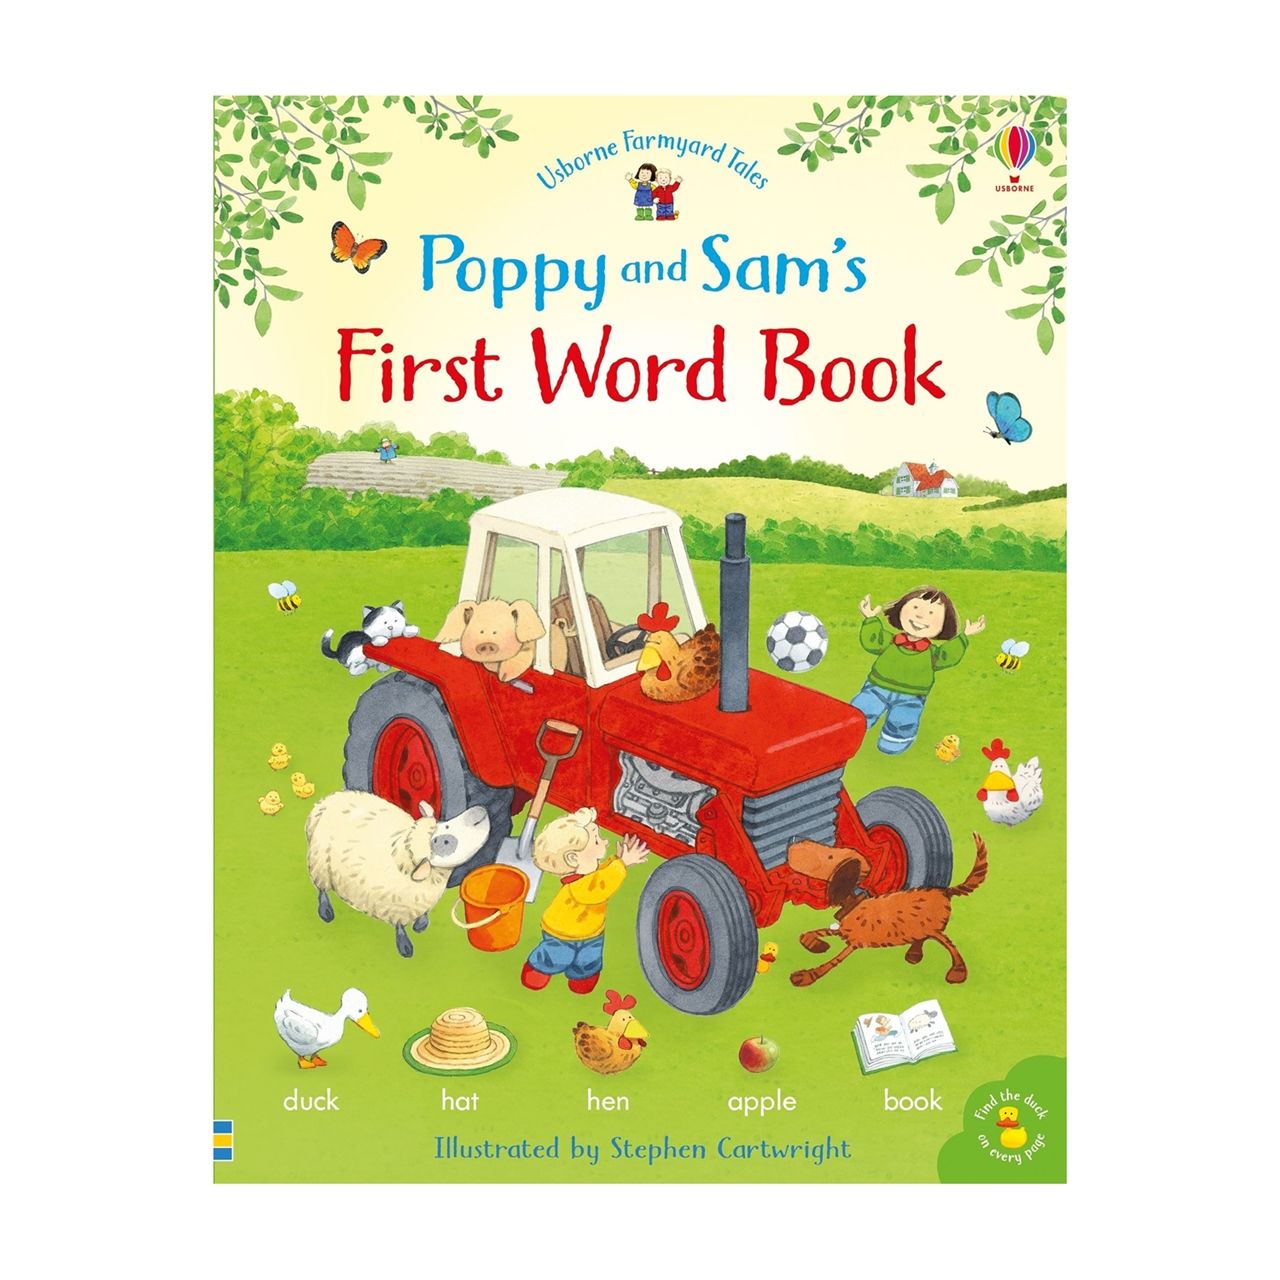 Fyt Poppy and Sams First Word Book